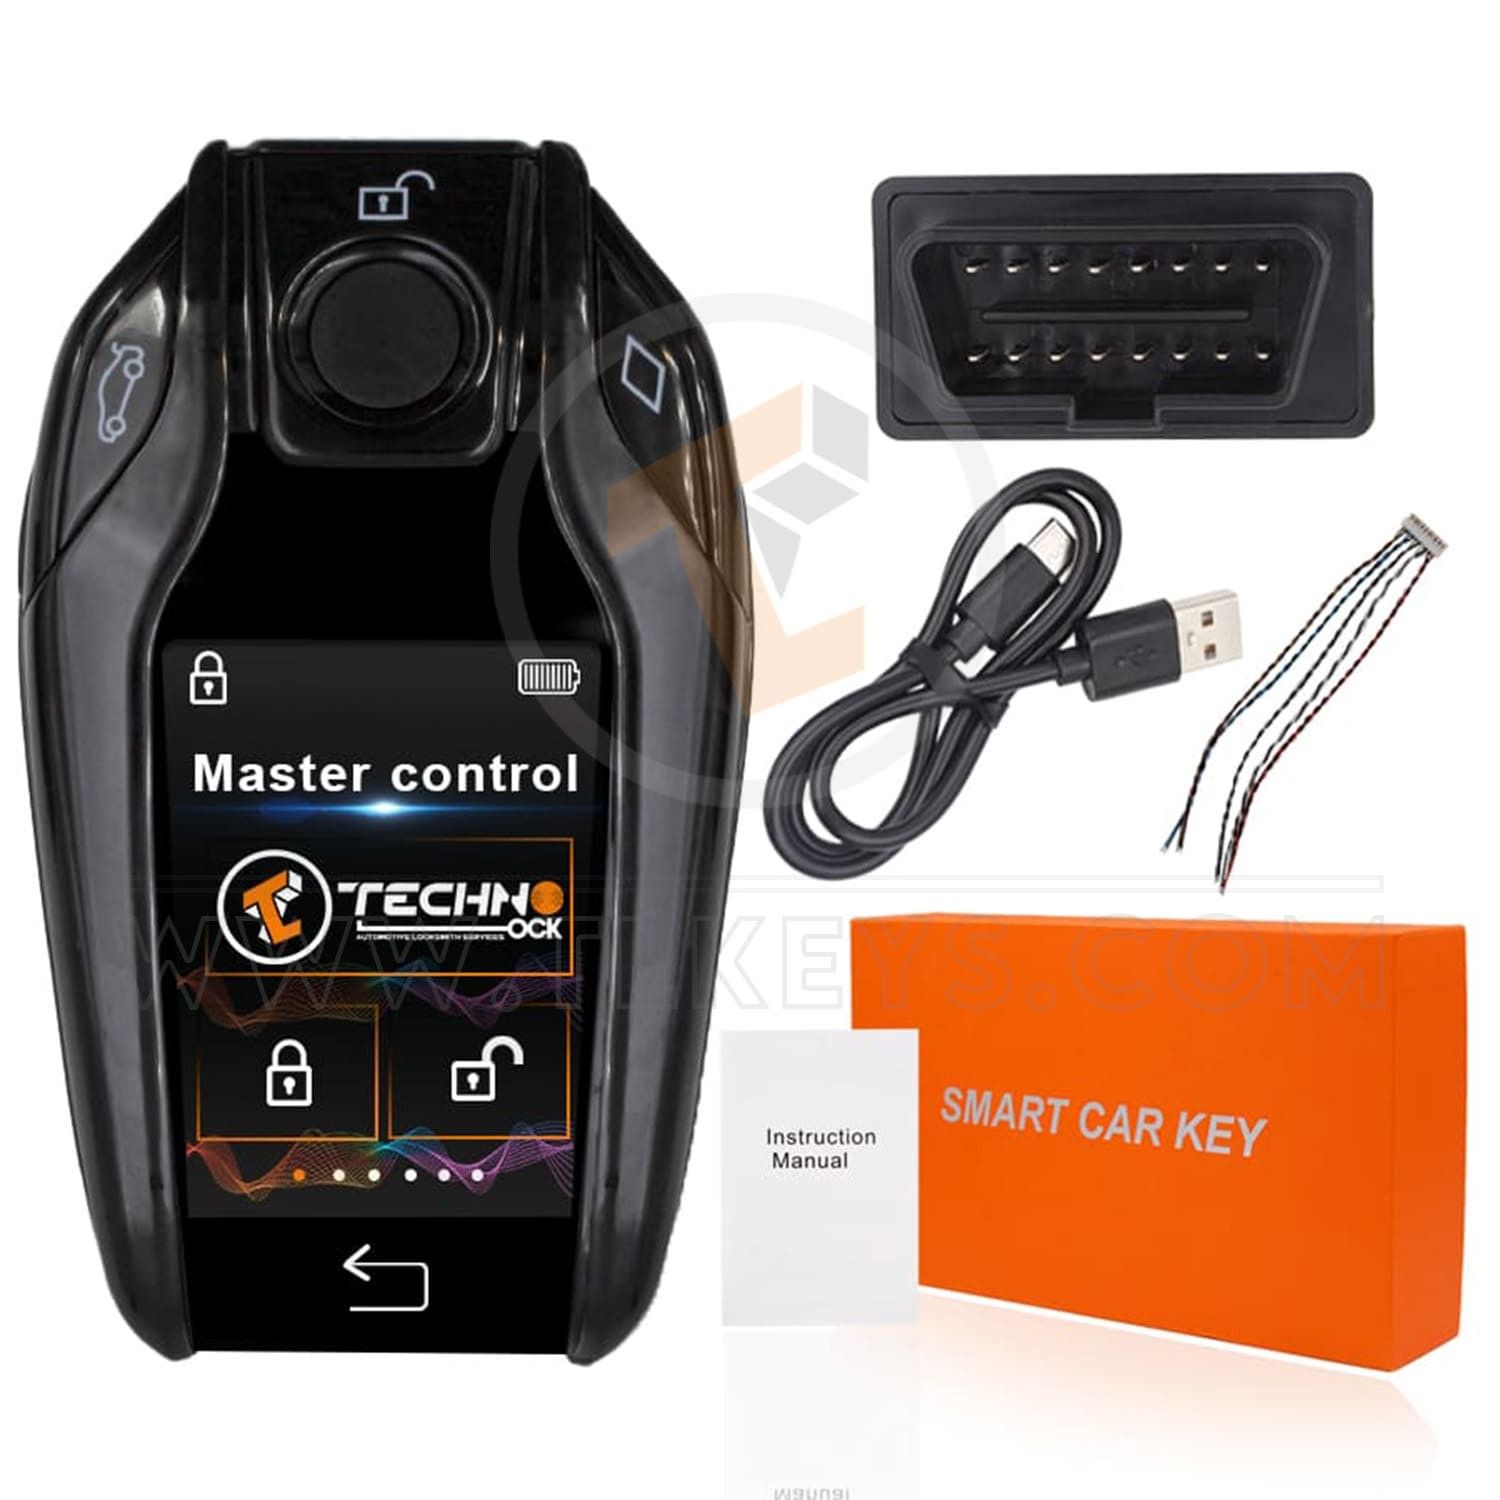 LCD Universal Modified Smart Key Remote Kit For All Keyless Entry Car BMW Type Keyless Go Yes